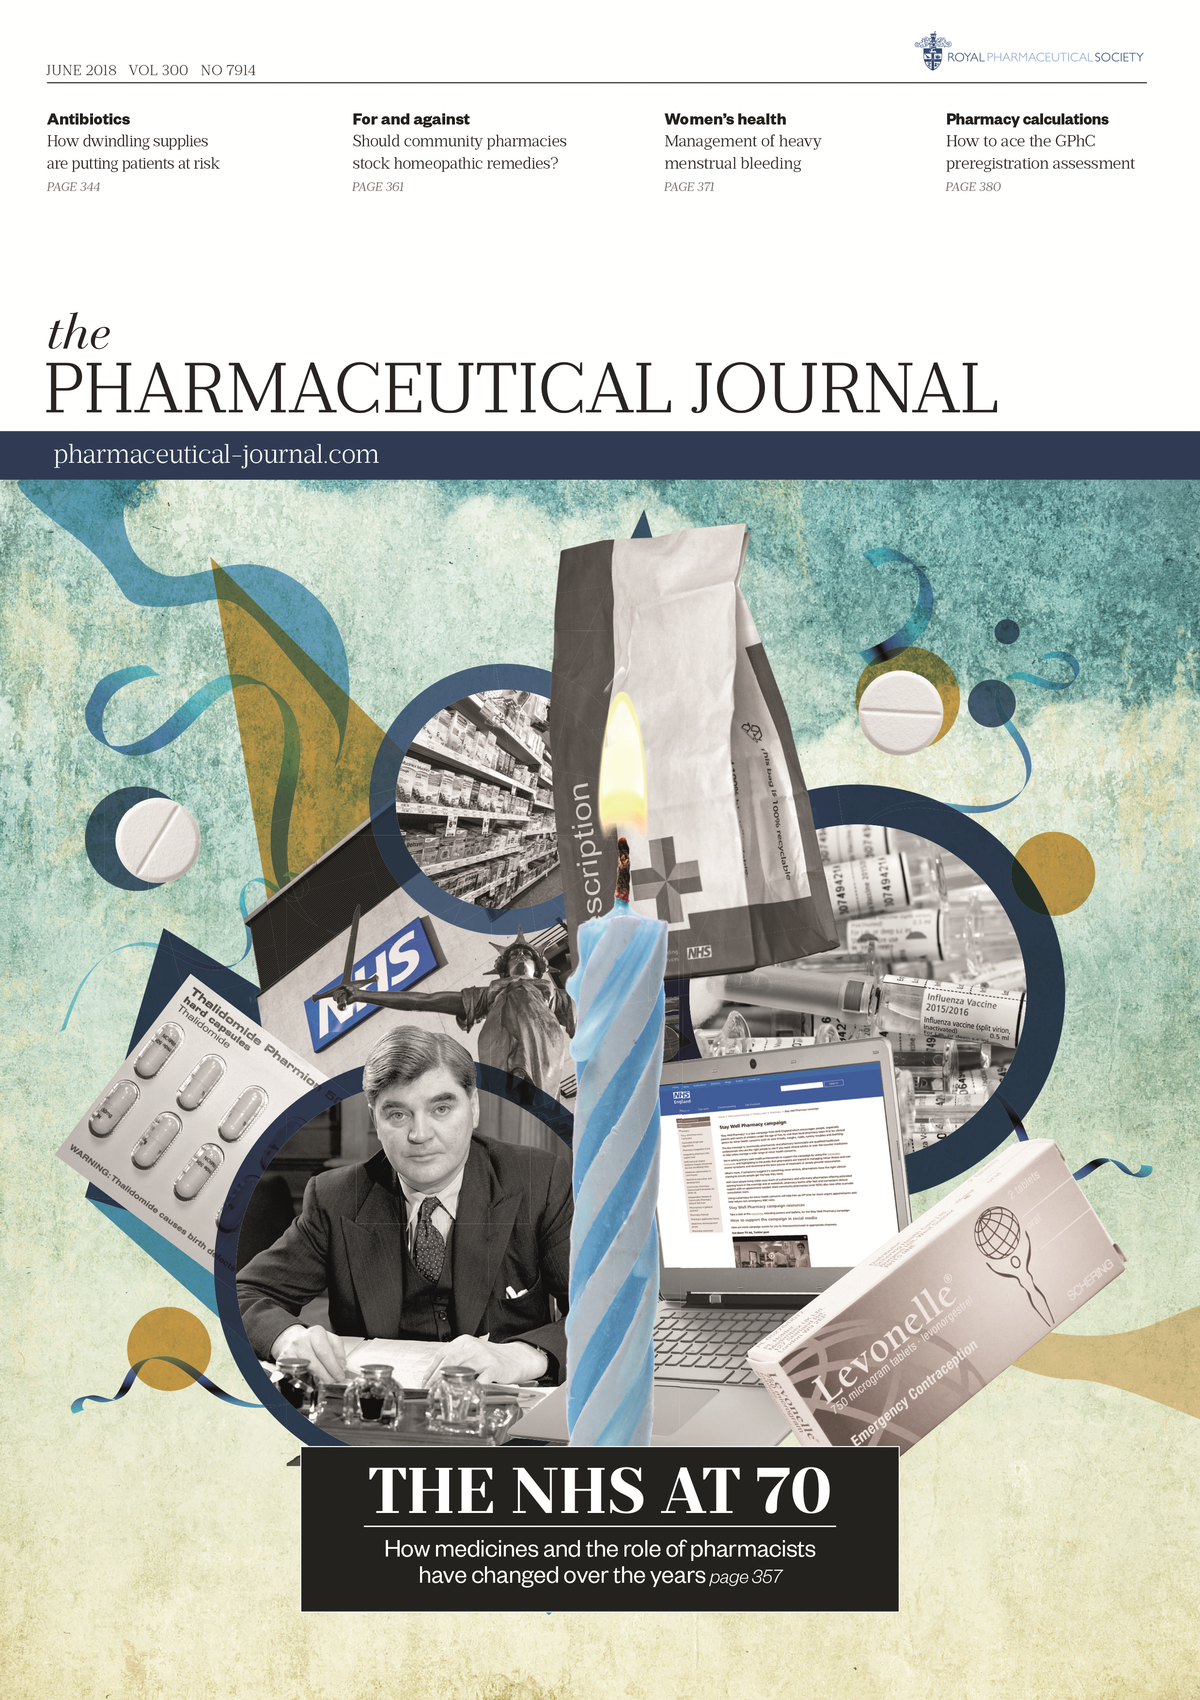 Publication issue cover for PJ, June 2018, Vol 300, No 7914